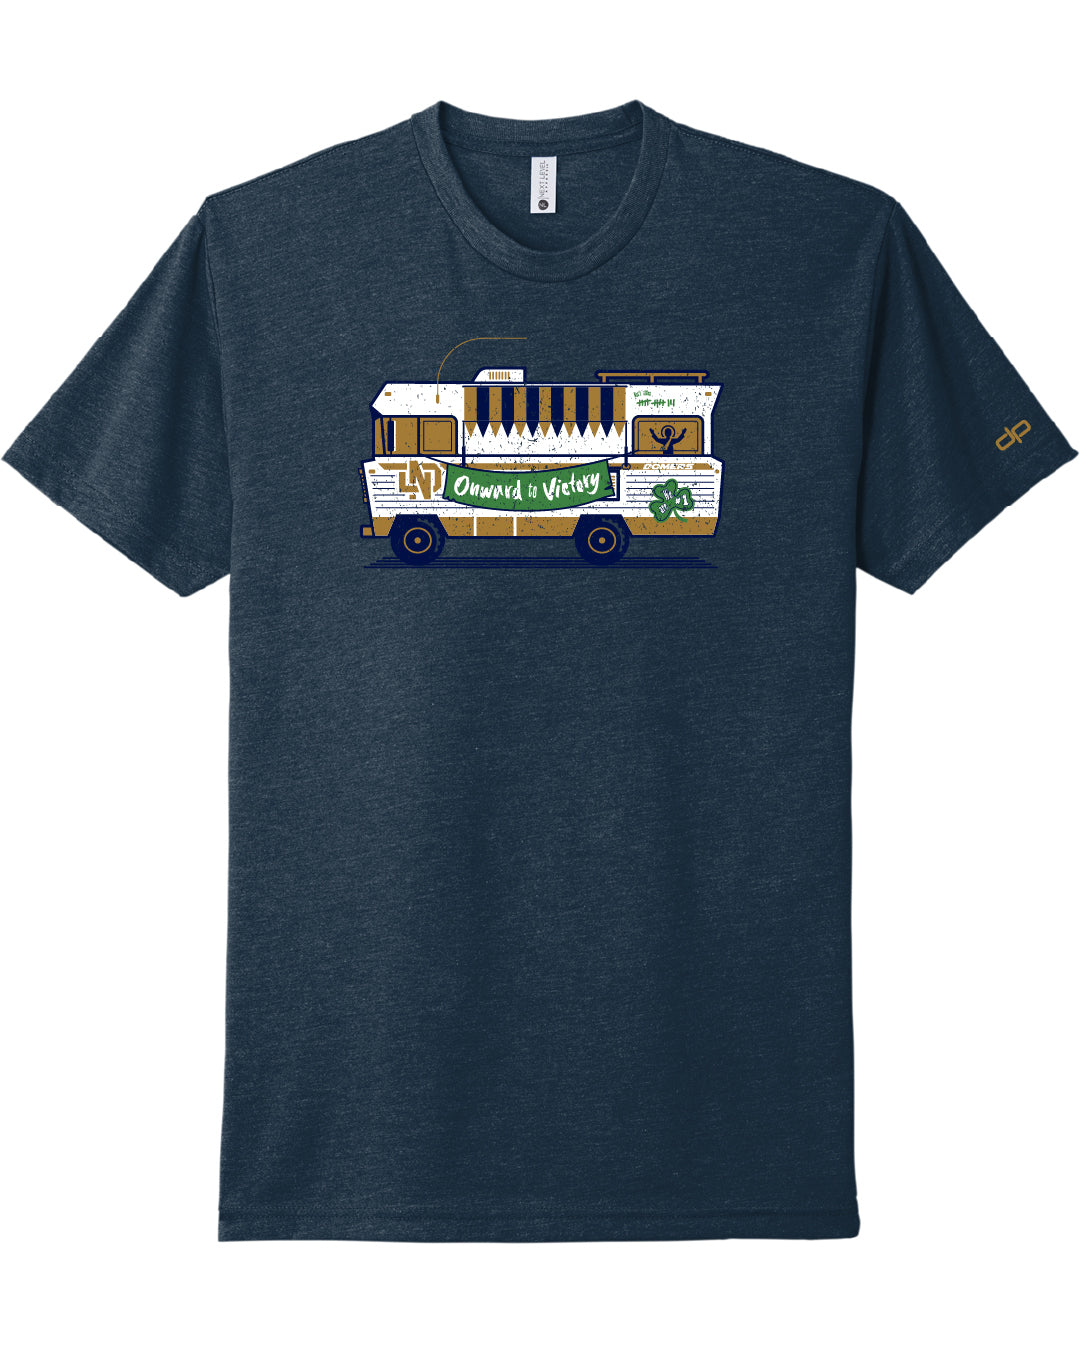 Win The Tailgate Indy t-shirt